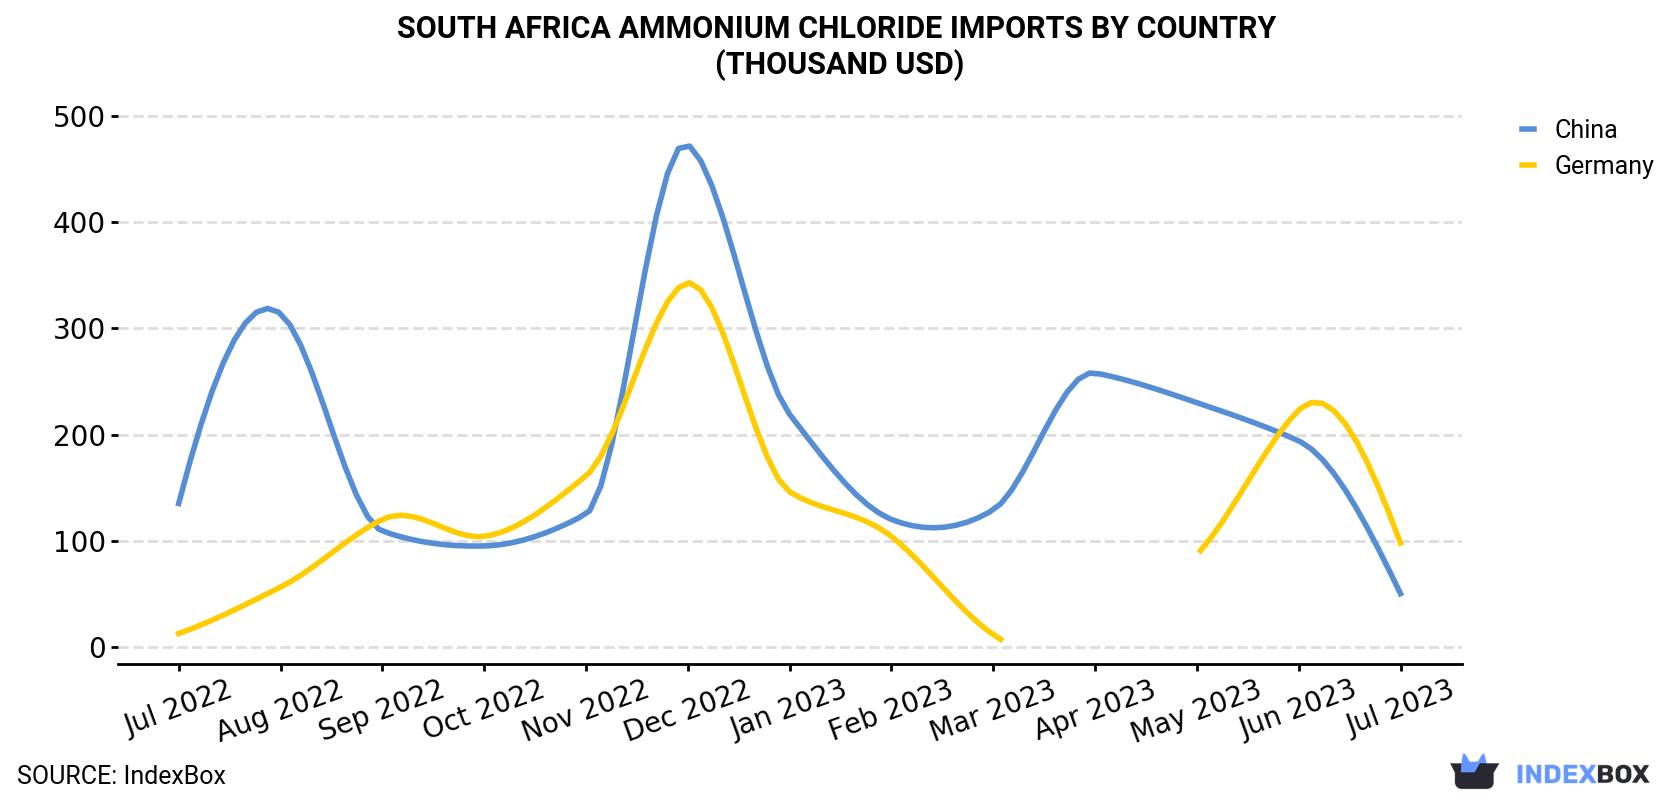 South Africa Ammonium Chloride Imports By Country (Thousand USD)